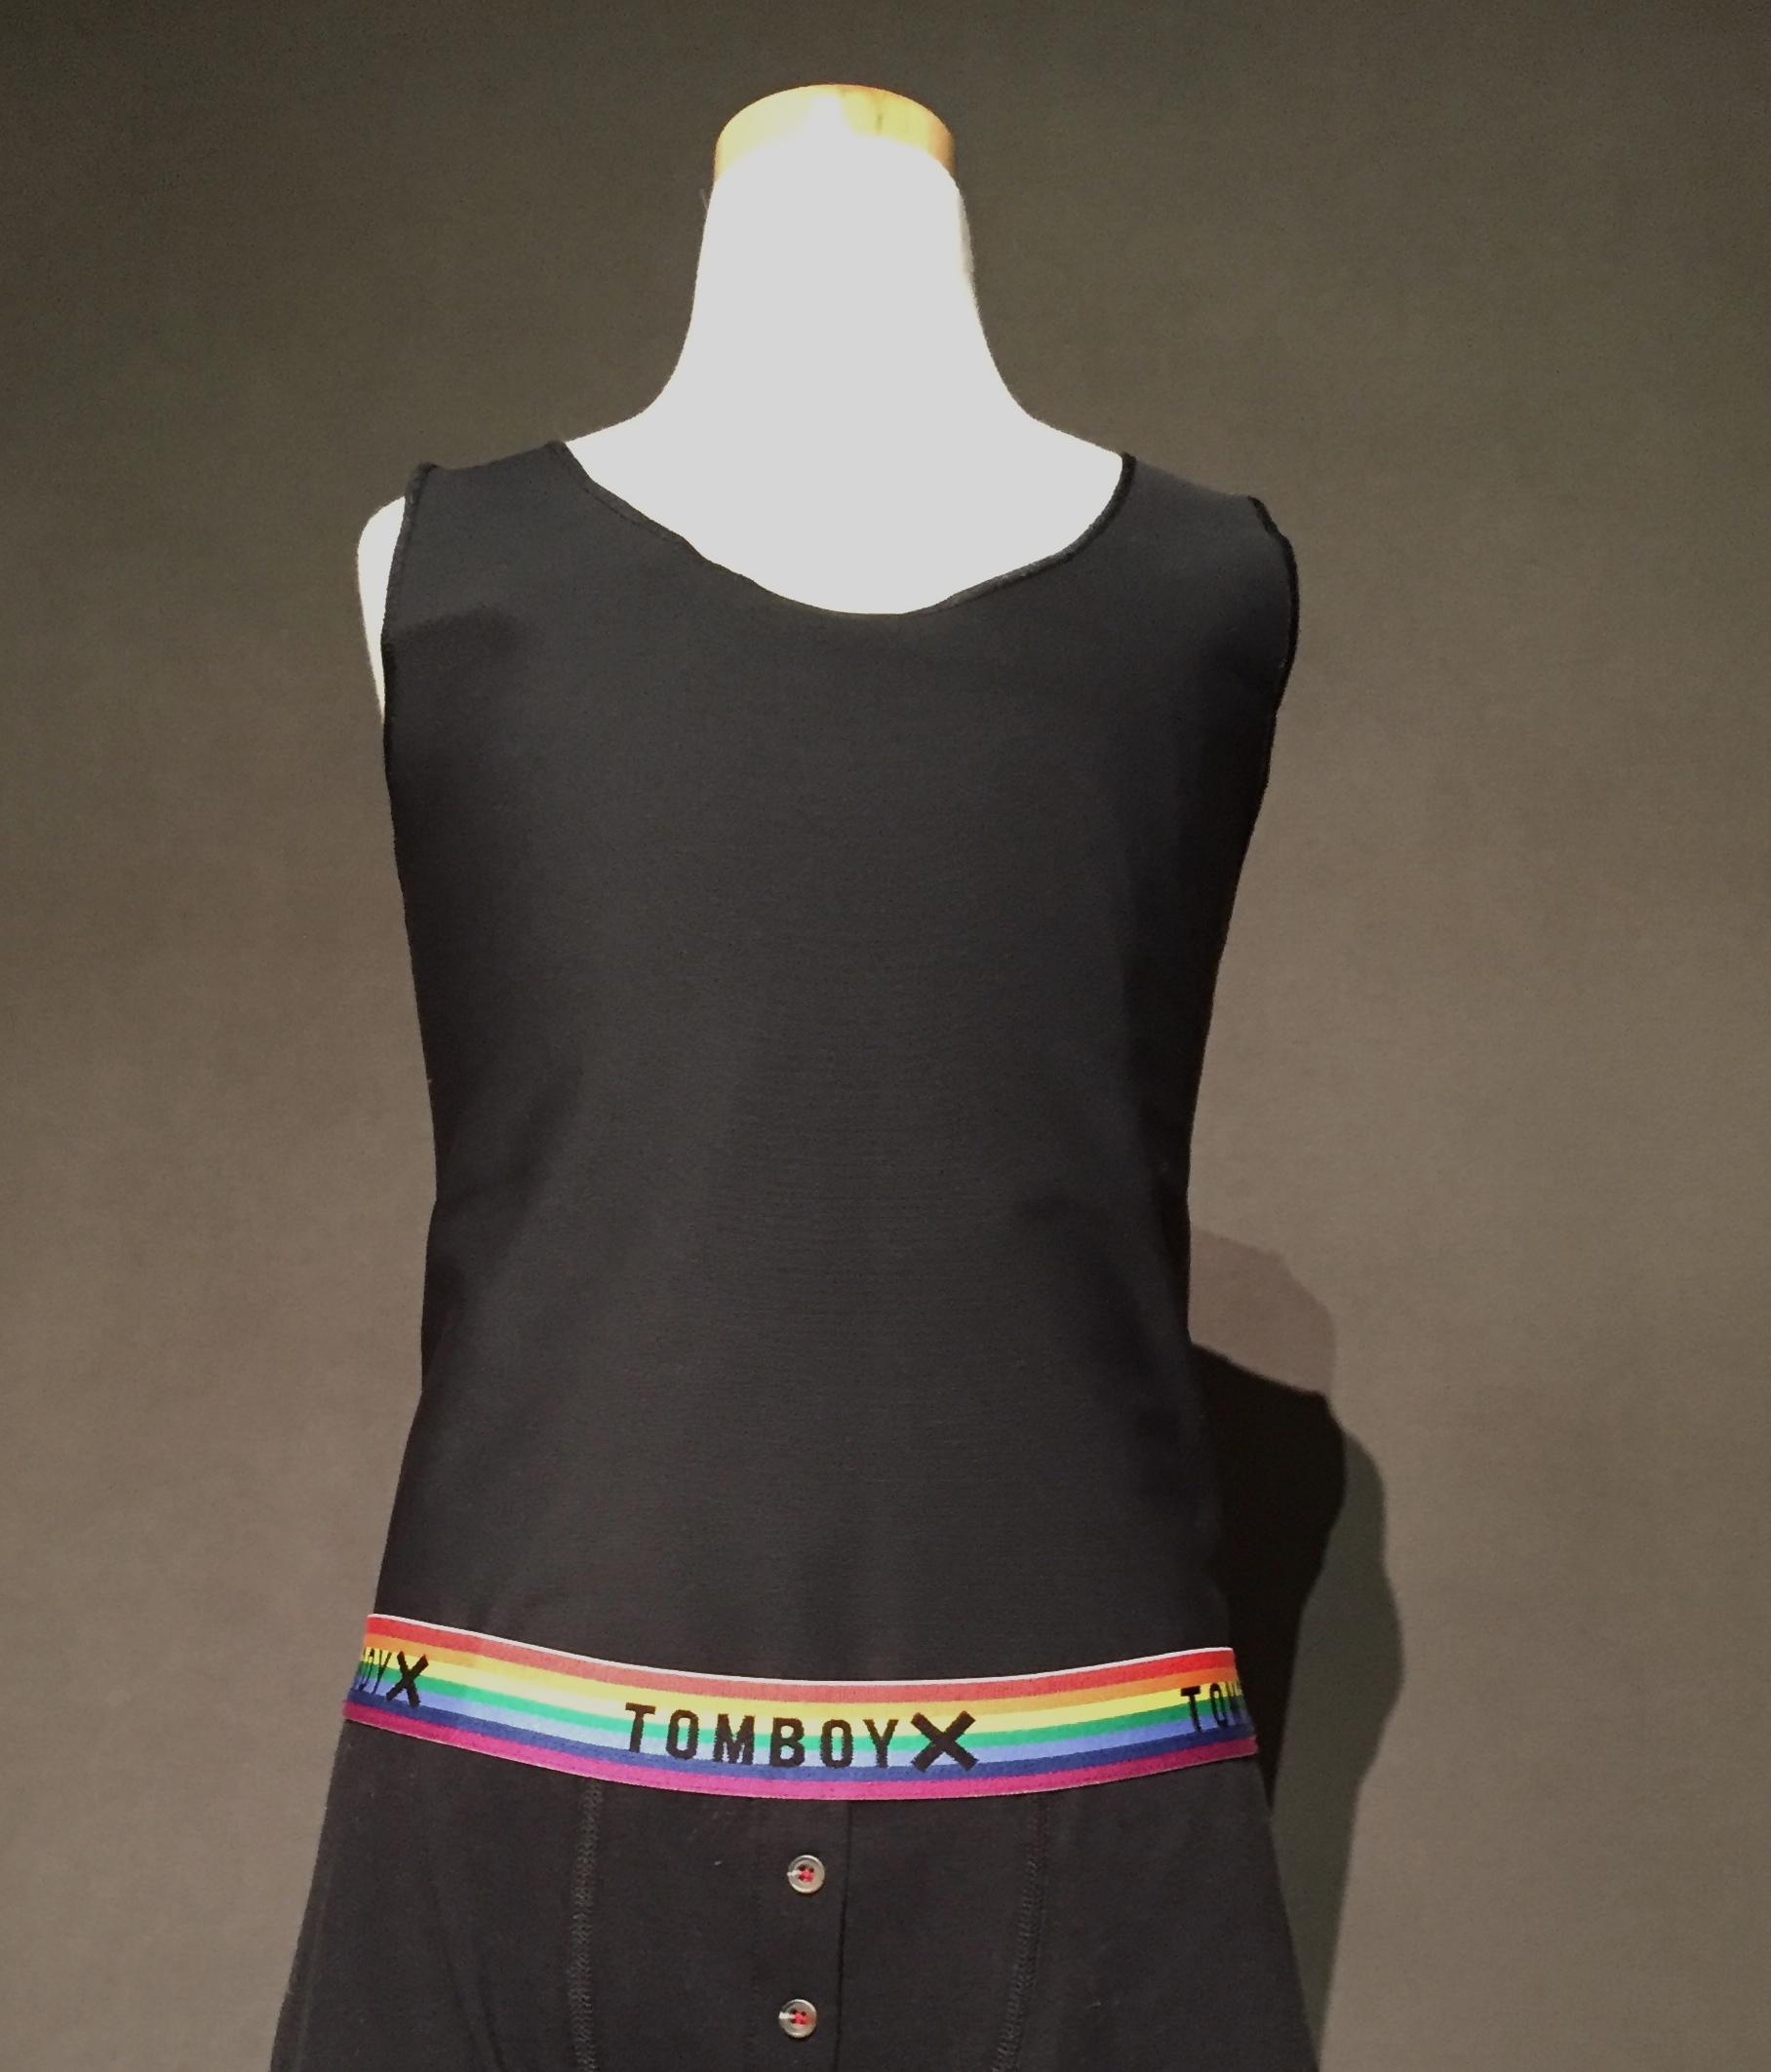 Black binder with boxer briefs with rainbow waistband reading "TomboyX"